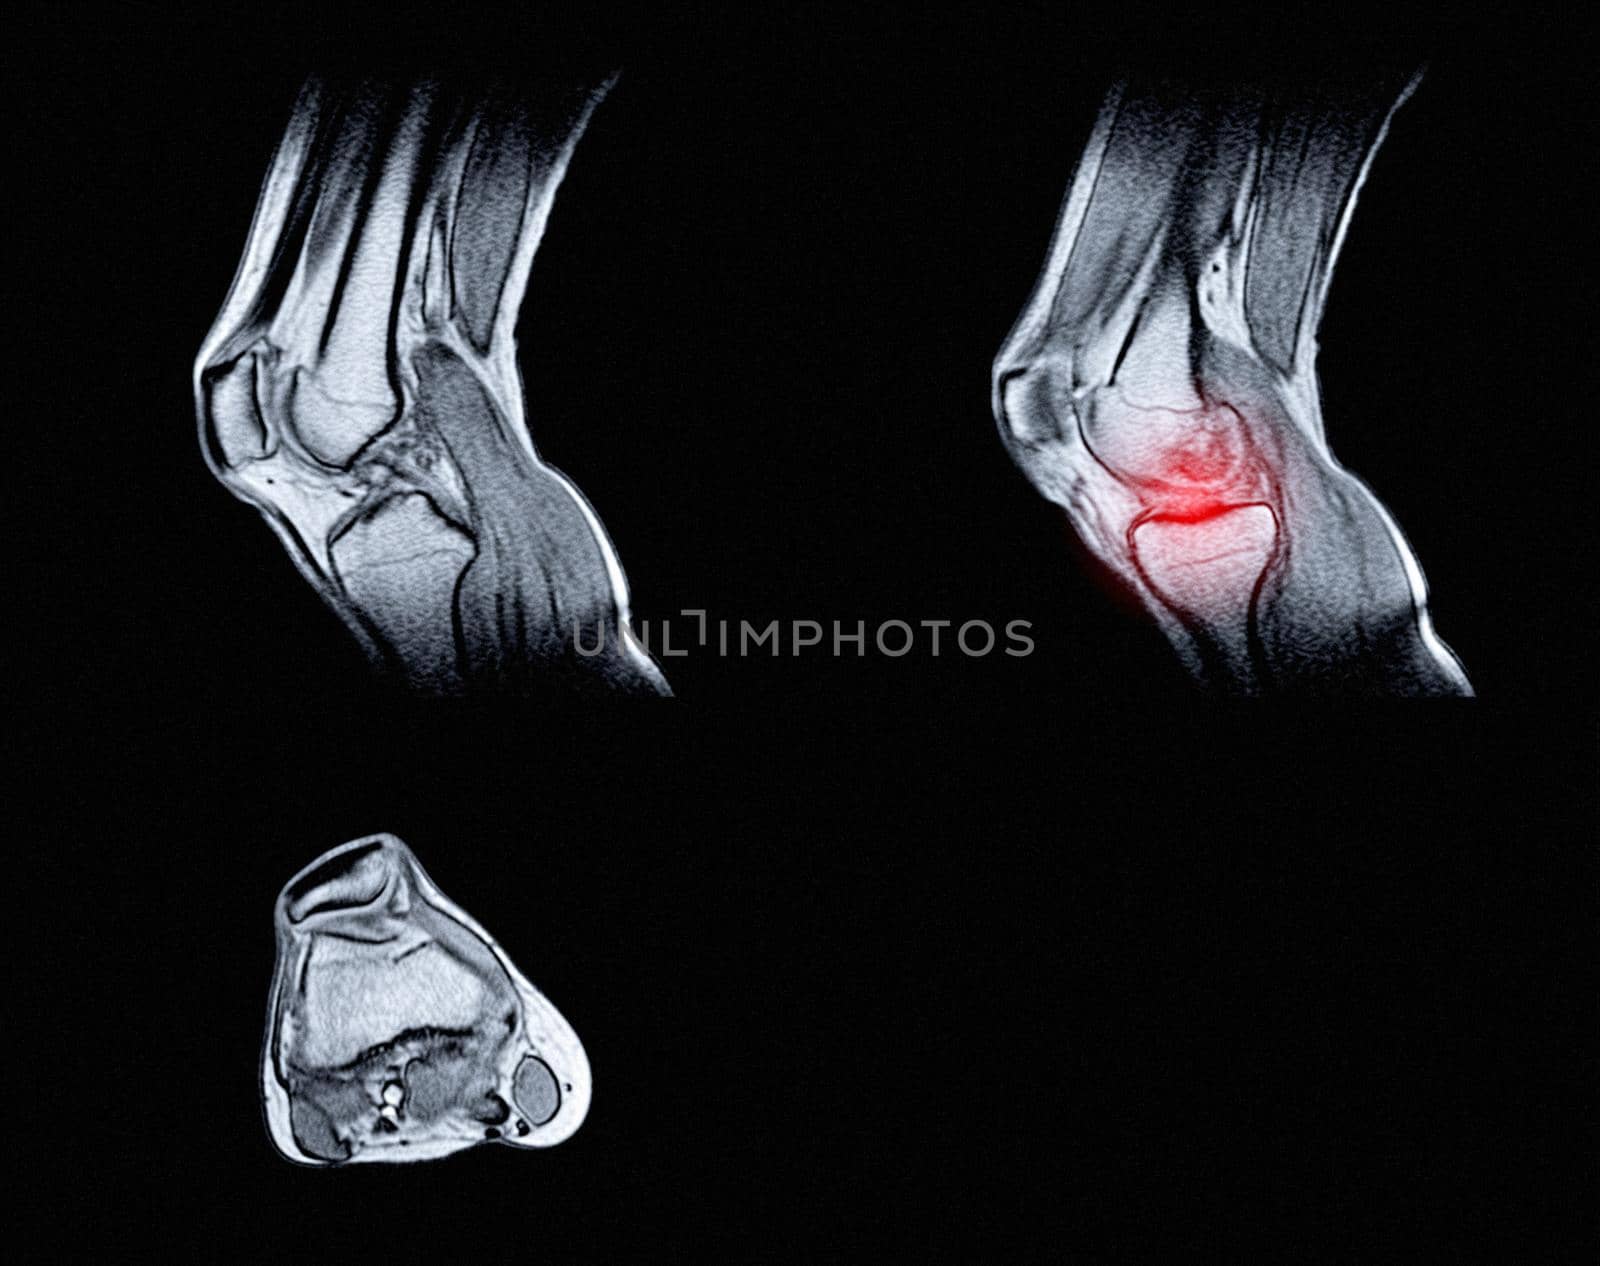 Magnetic resonance imaging (MRI) of right knee. Closed injury of the knee joint, with manifestations of arthrosis. A crunch in the knee joint.